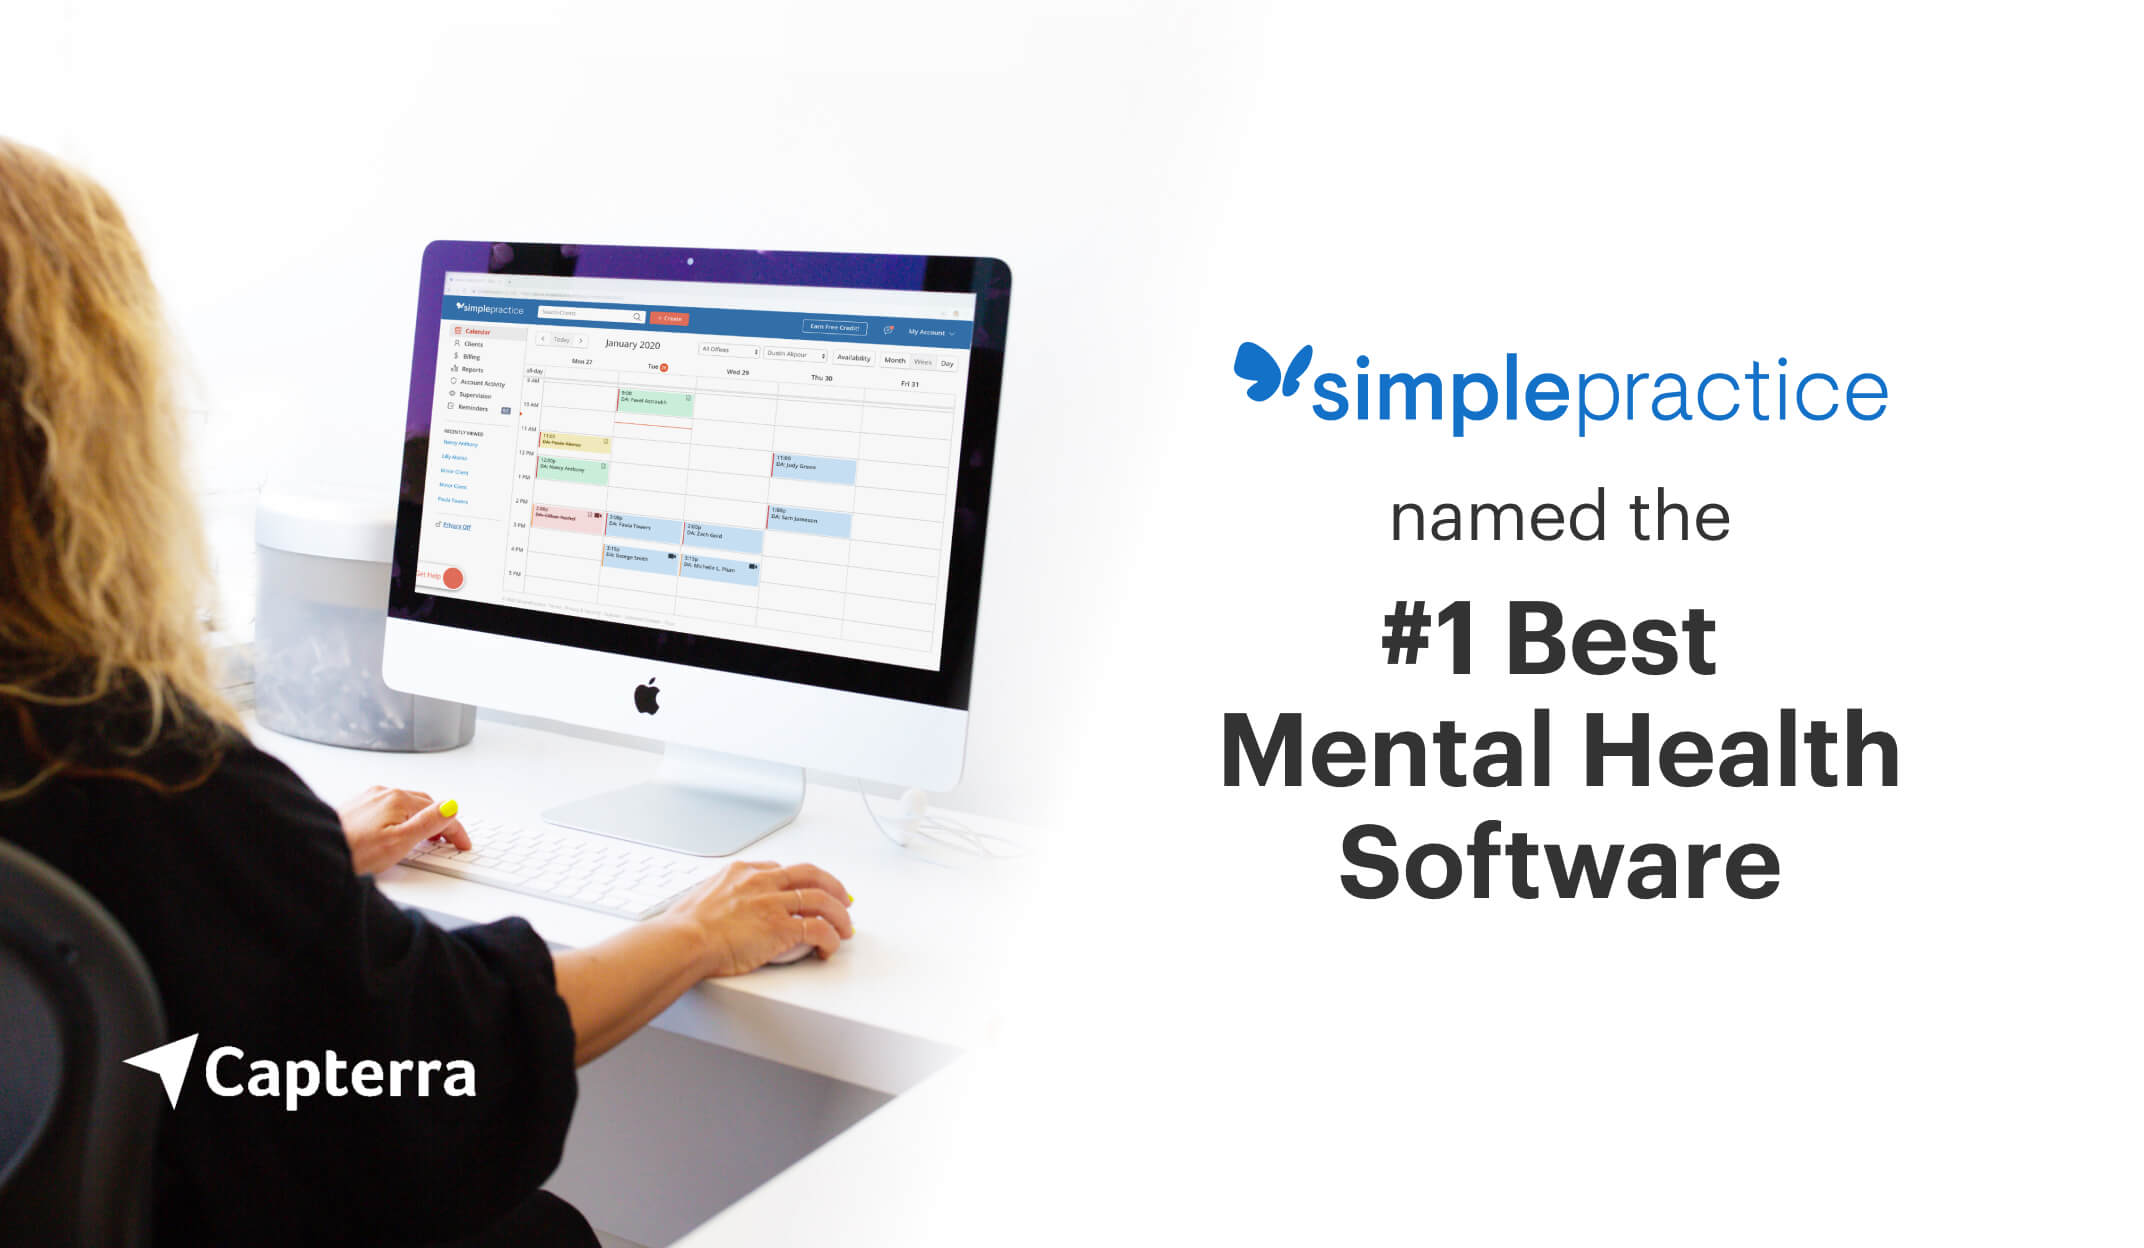 SimplePractice is #1 on Top 20 Most Popular Mental Health Software